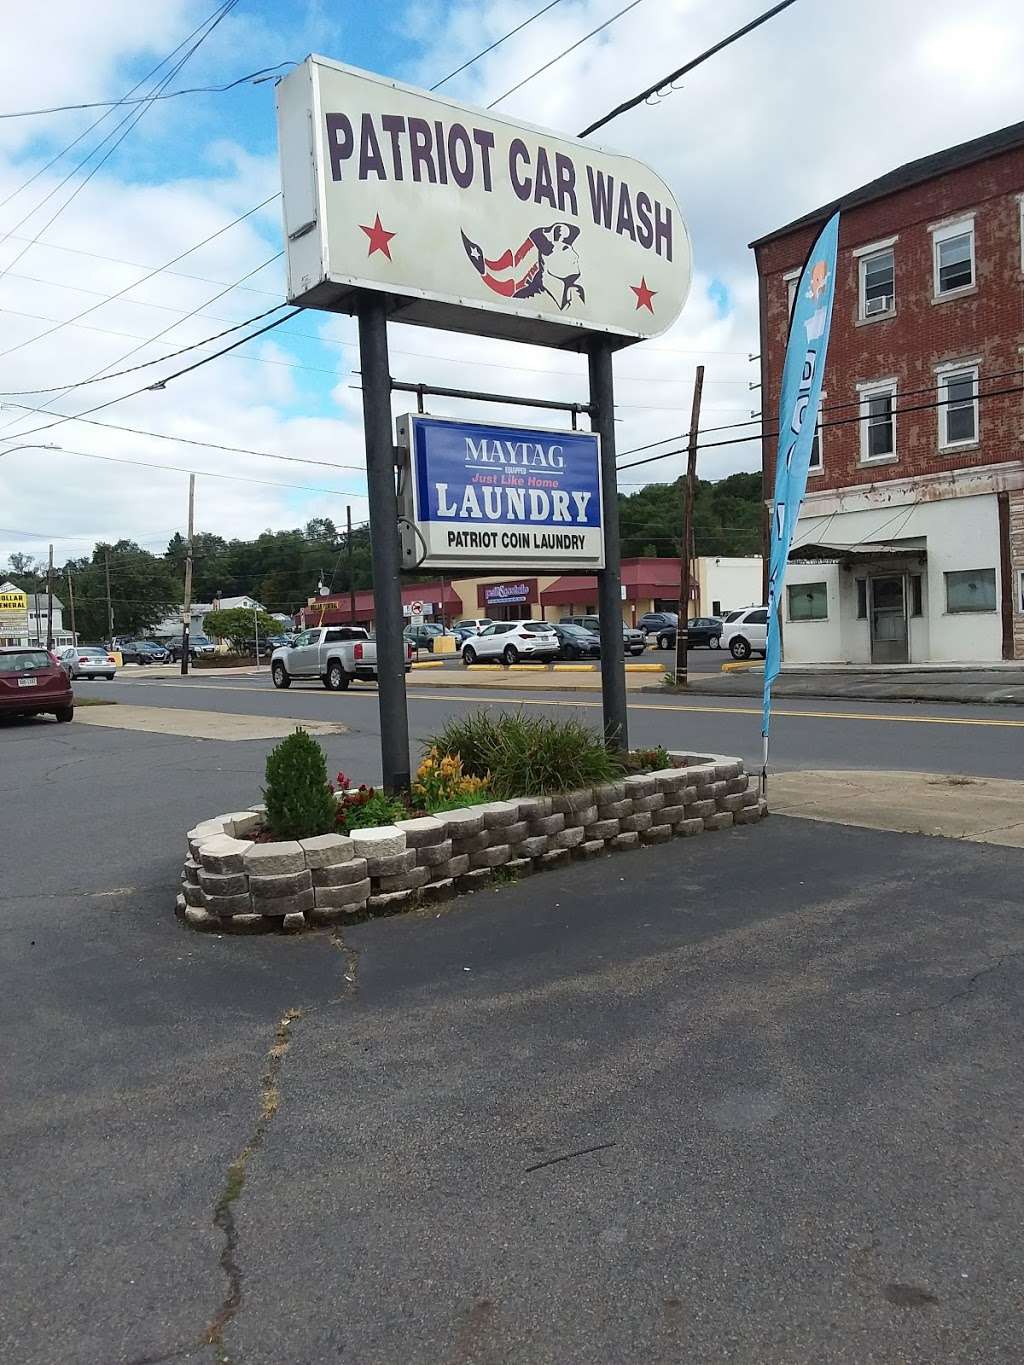 Maytag Patriot Coin Laundry | 480 N Main St, Pittston, PA 18640, USA